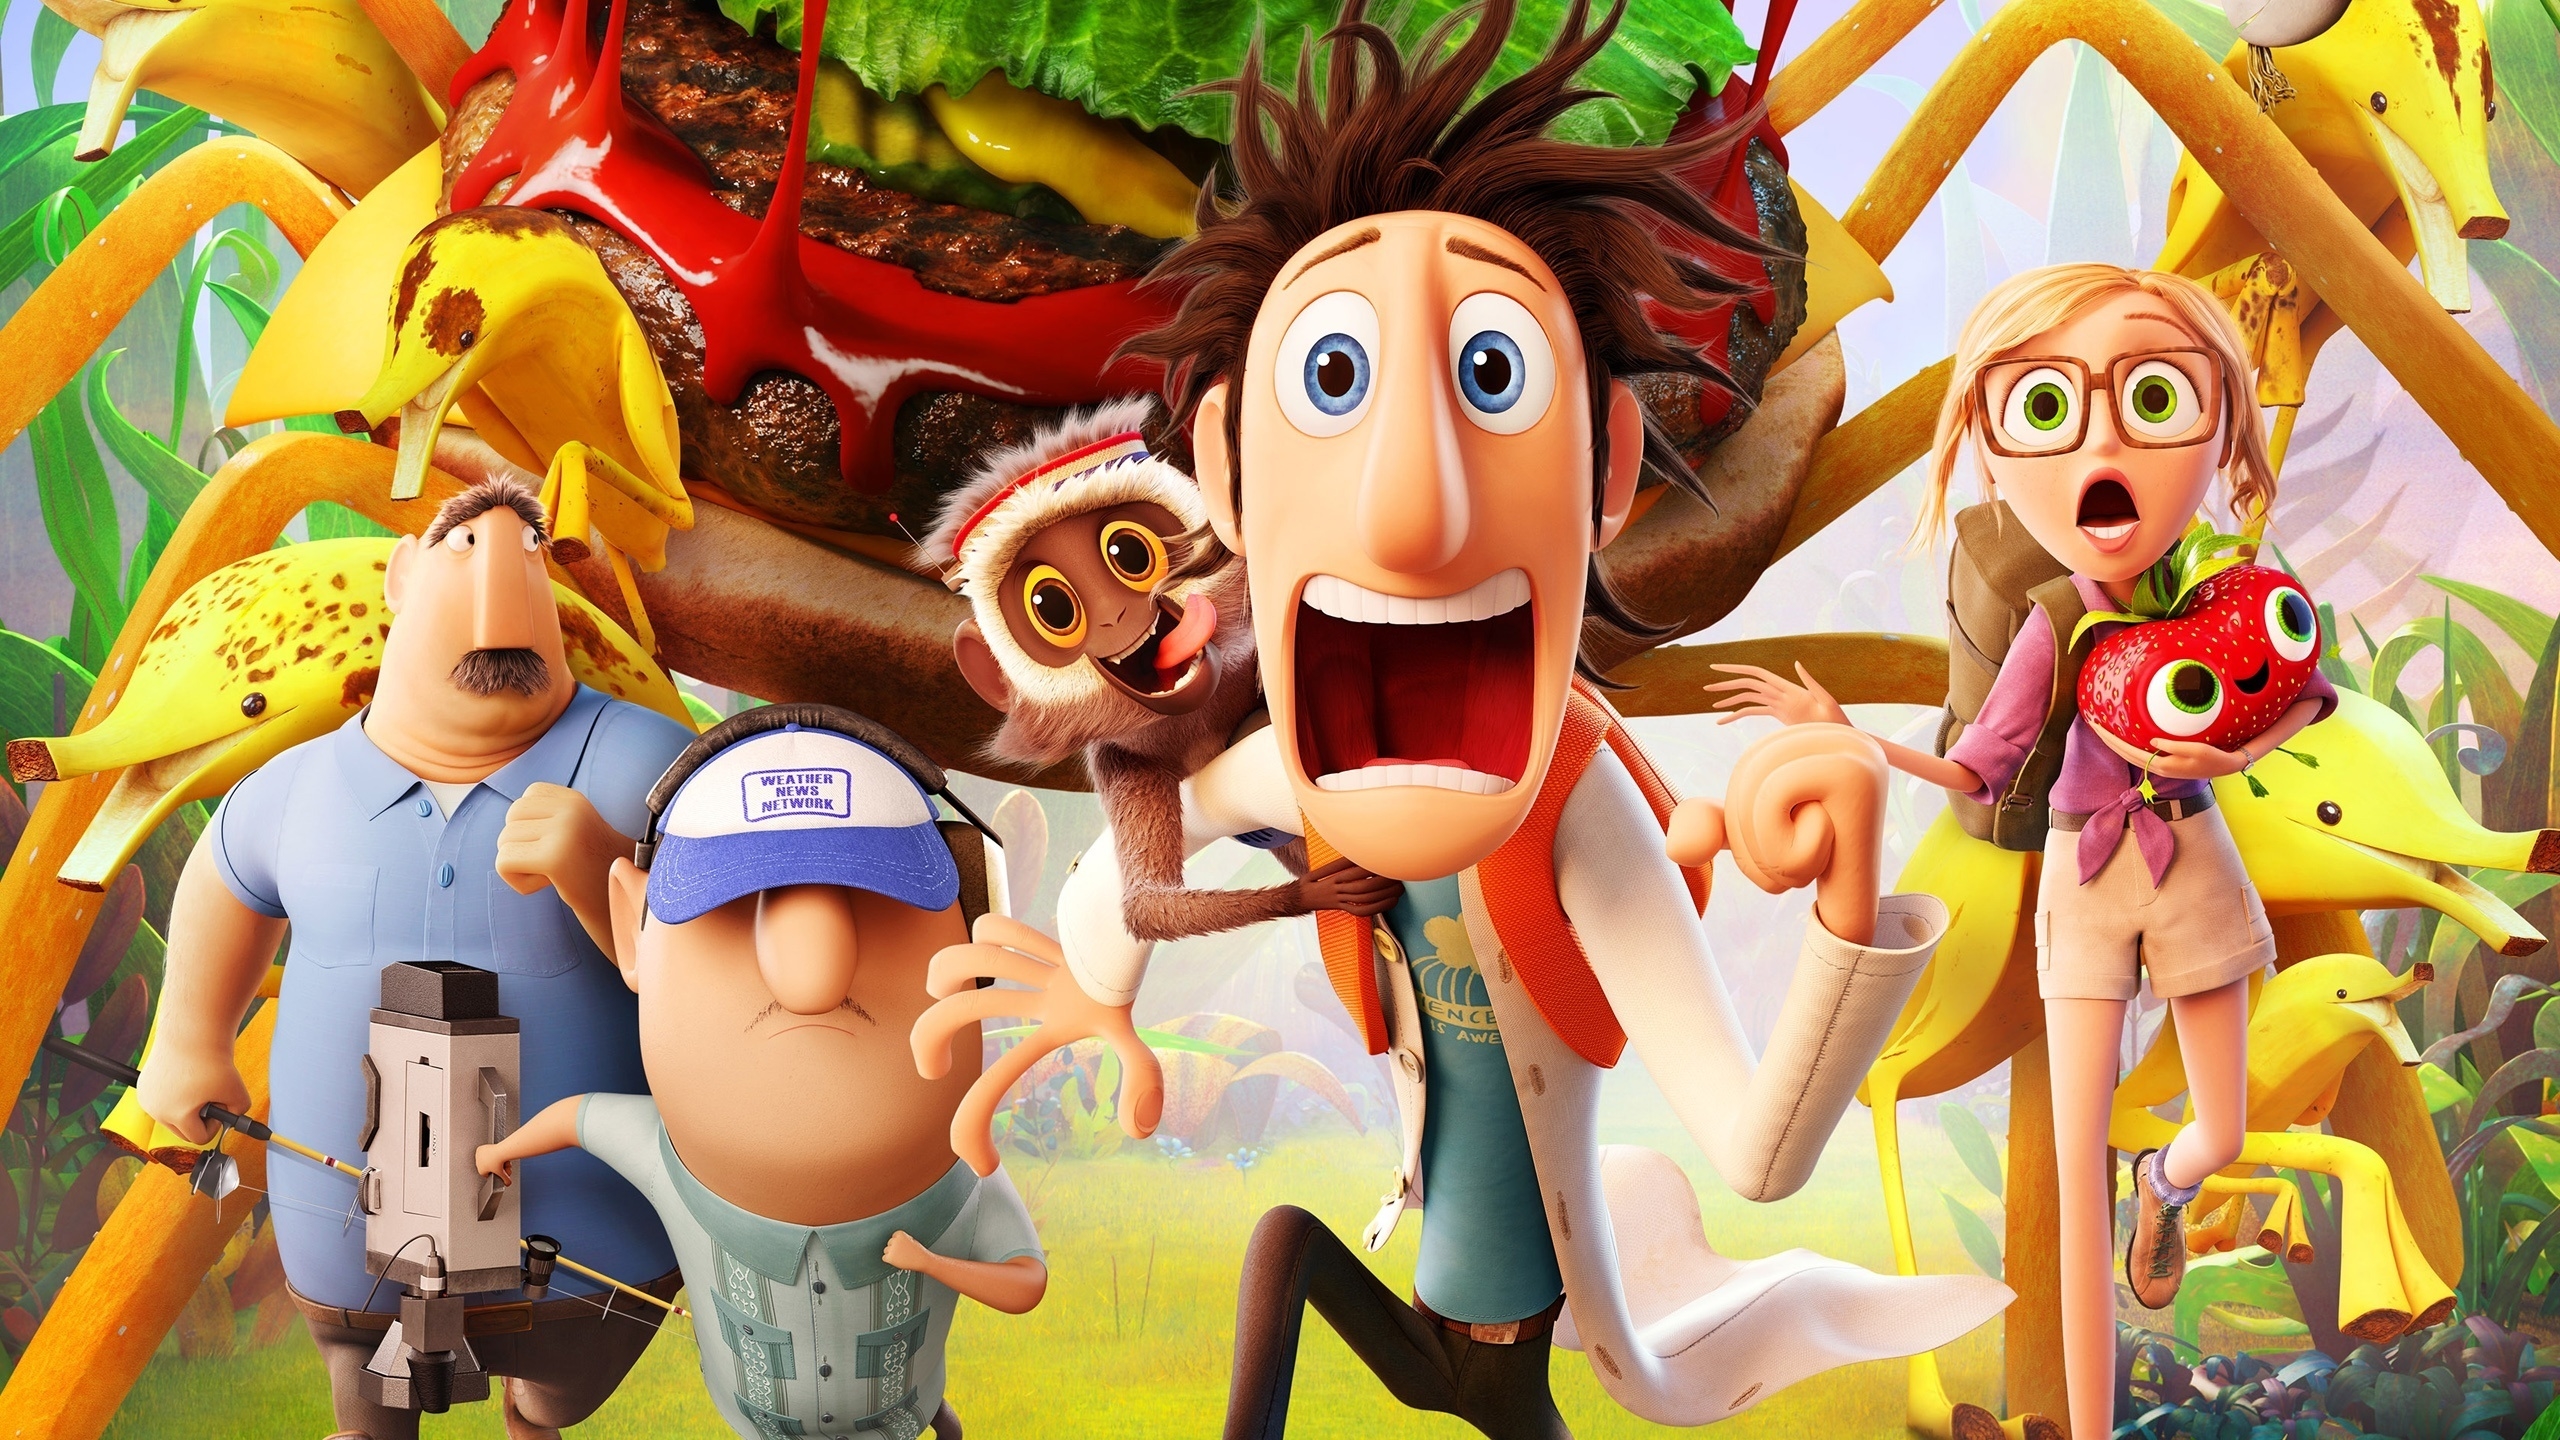 Cloudy with a Chance of Meatballs 2 Cast for 2560x1440 HDTV resolution